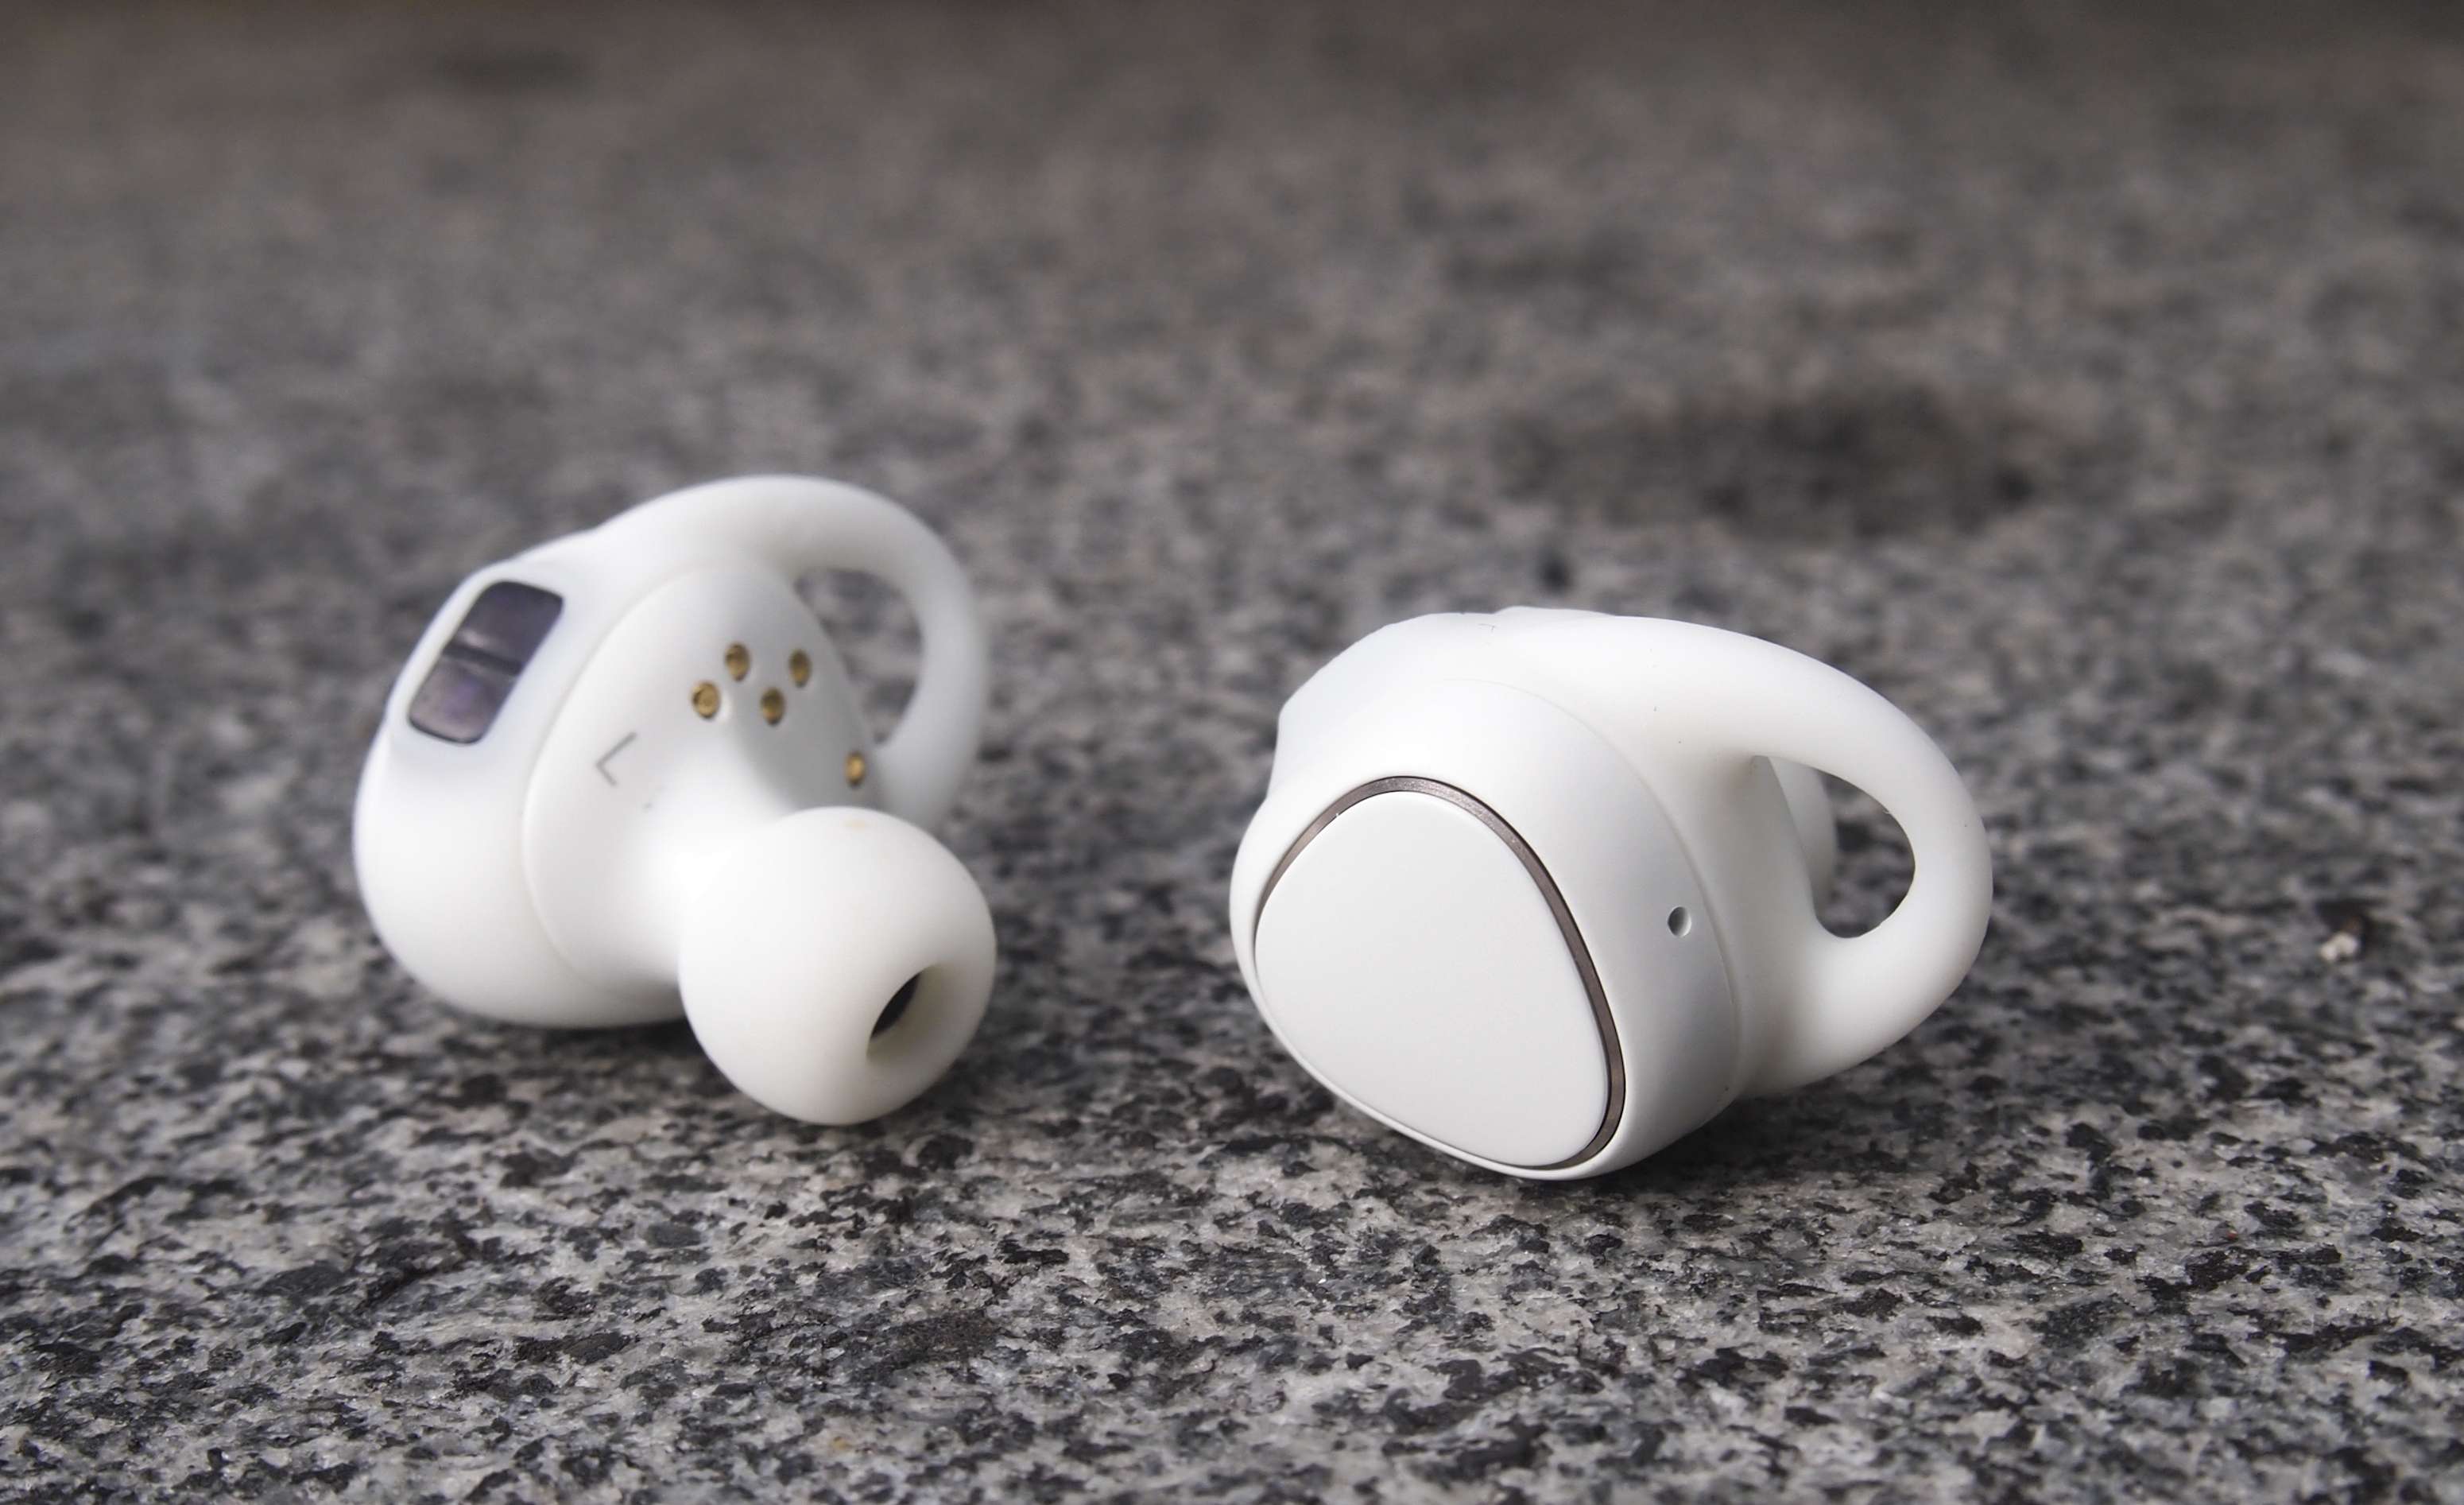 The very stylish Samsung Gear IconX earbuds.